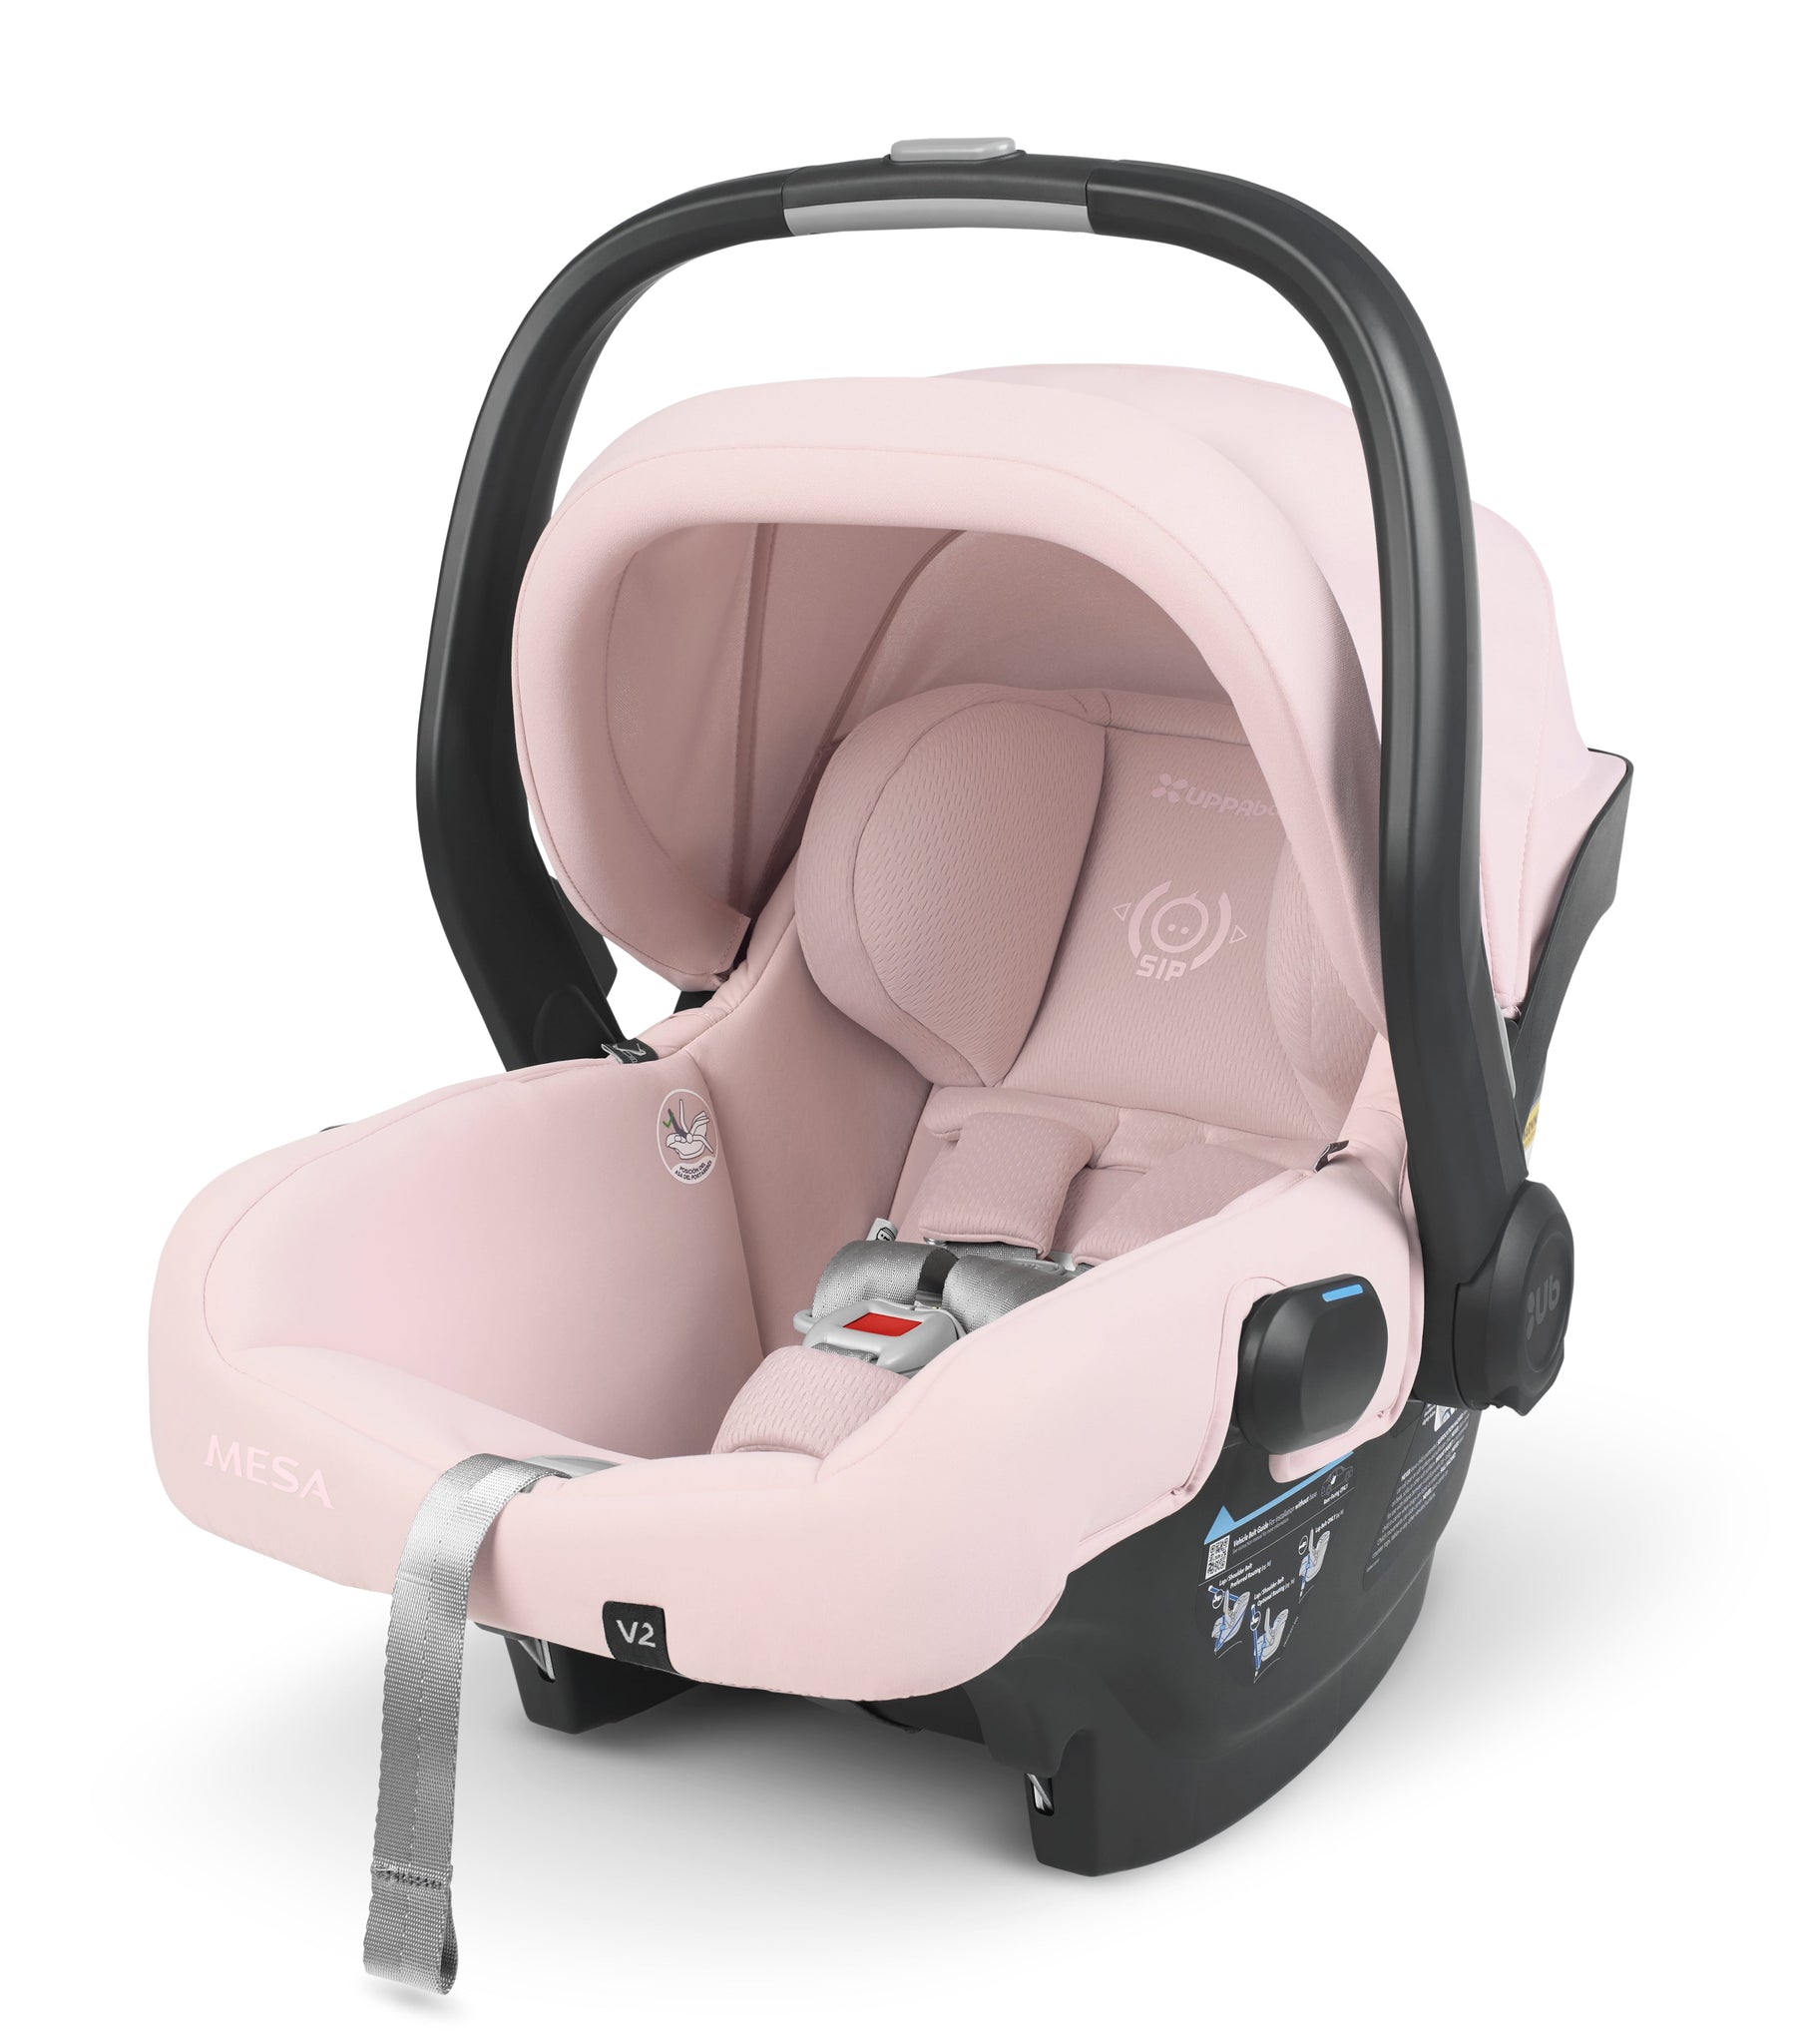 (Open Box - NEW) UPPAbaby Mesa V2 Infant Car Seat & Base - Alice (Dusty Pink)